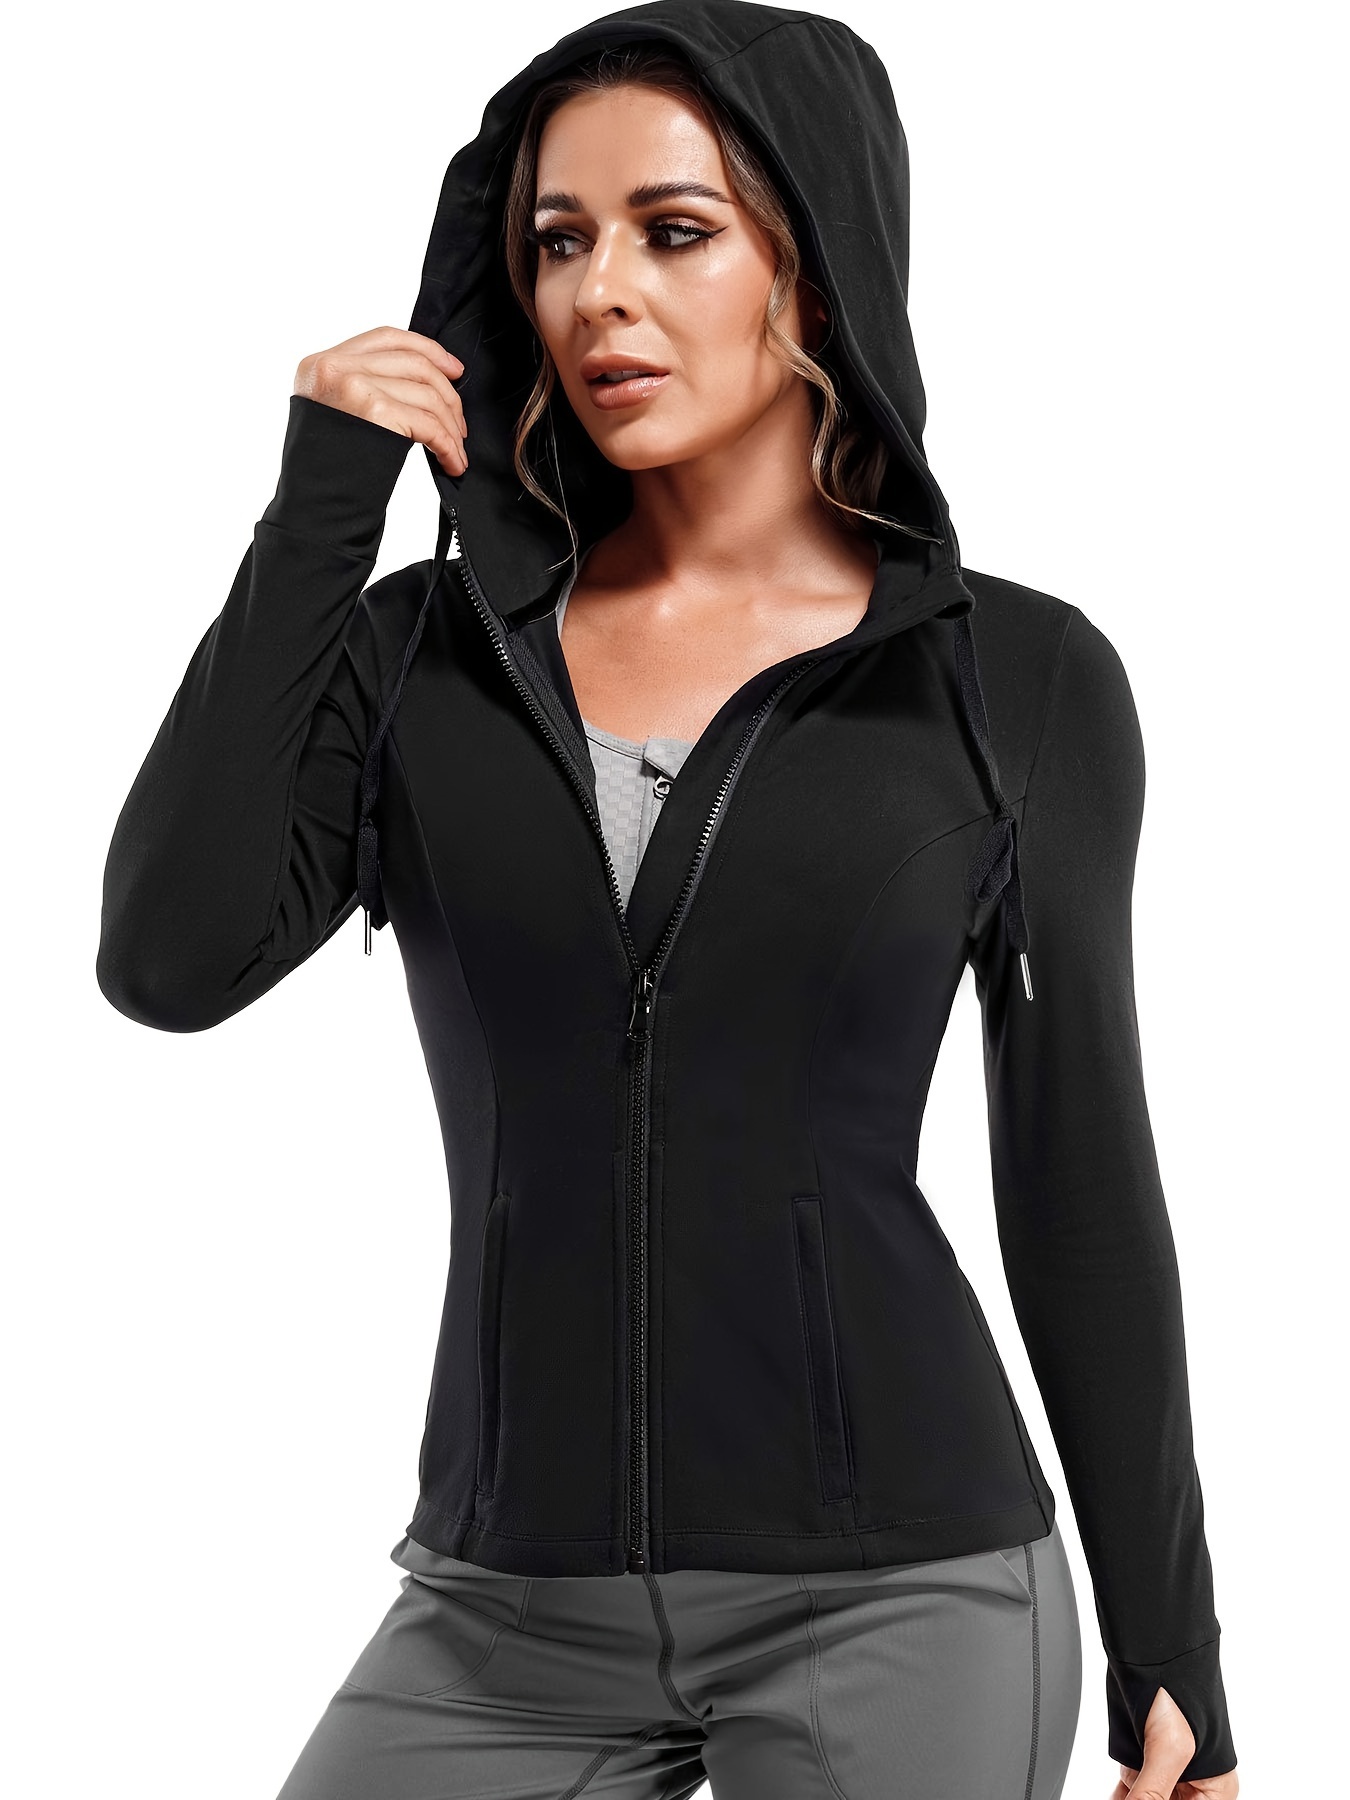 Womens Jacket Lulus Yoga Scuba Outfit Half Zipper Quick Drying Clothes Long  Sleeve Thumb Hole Training Running Hoodie Women Slim Fitness UY5X From  Dhclothing66nf2, $21.61